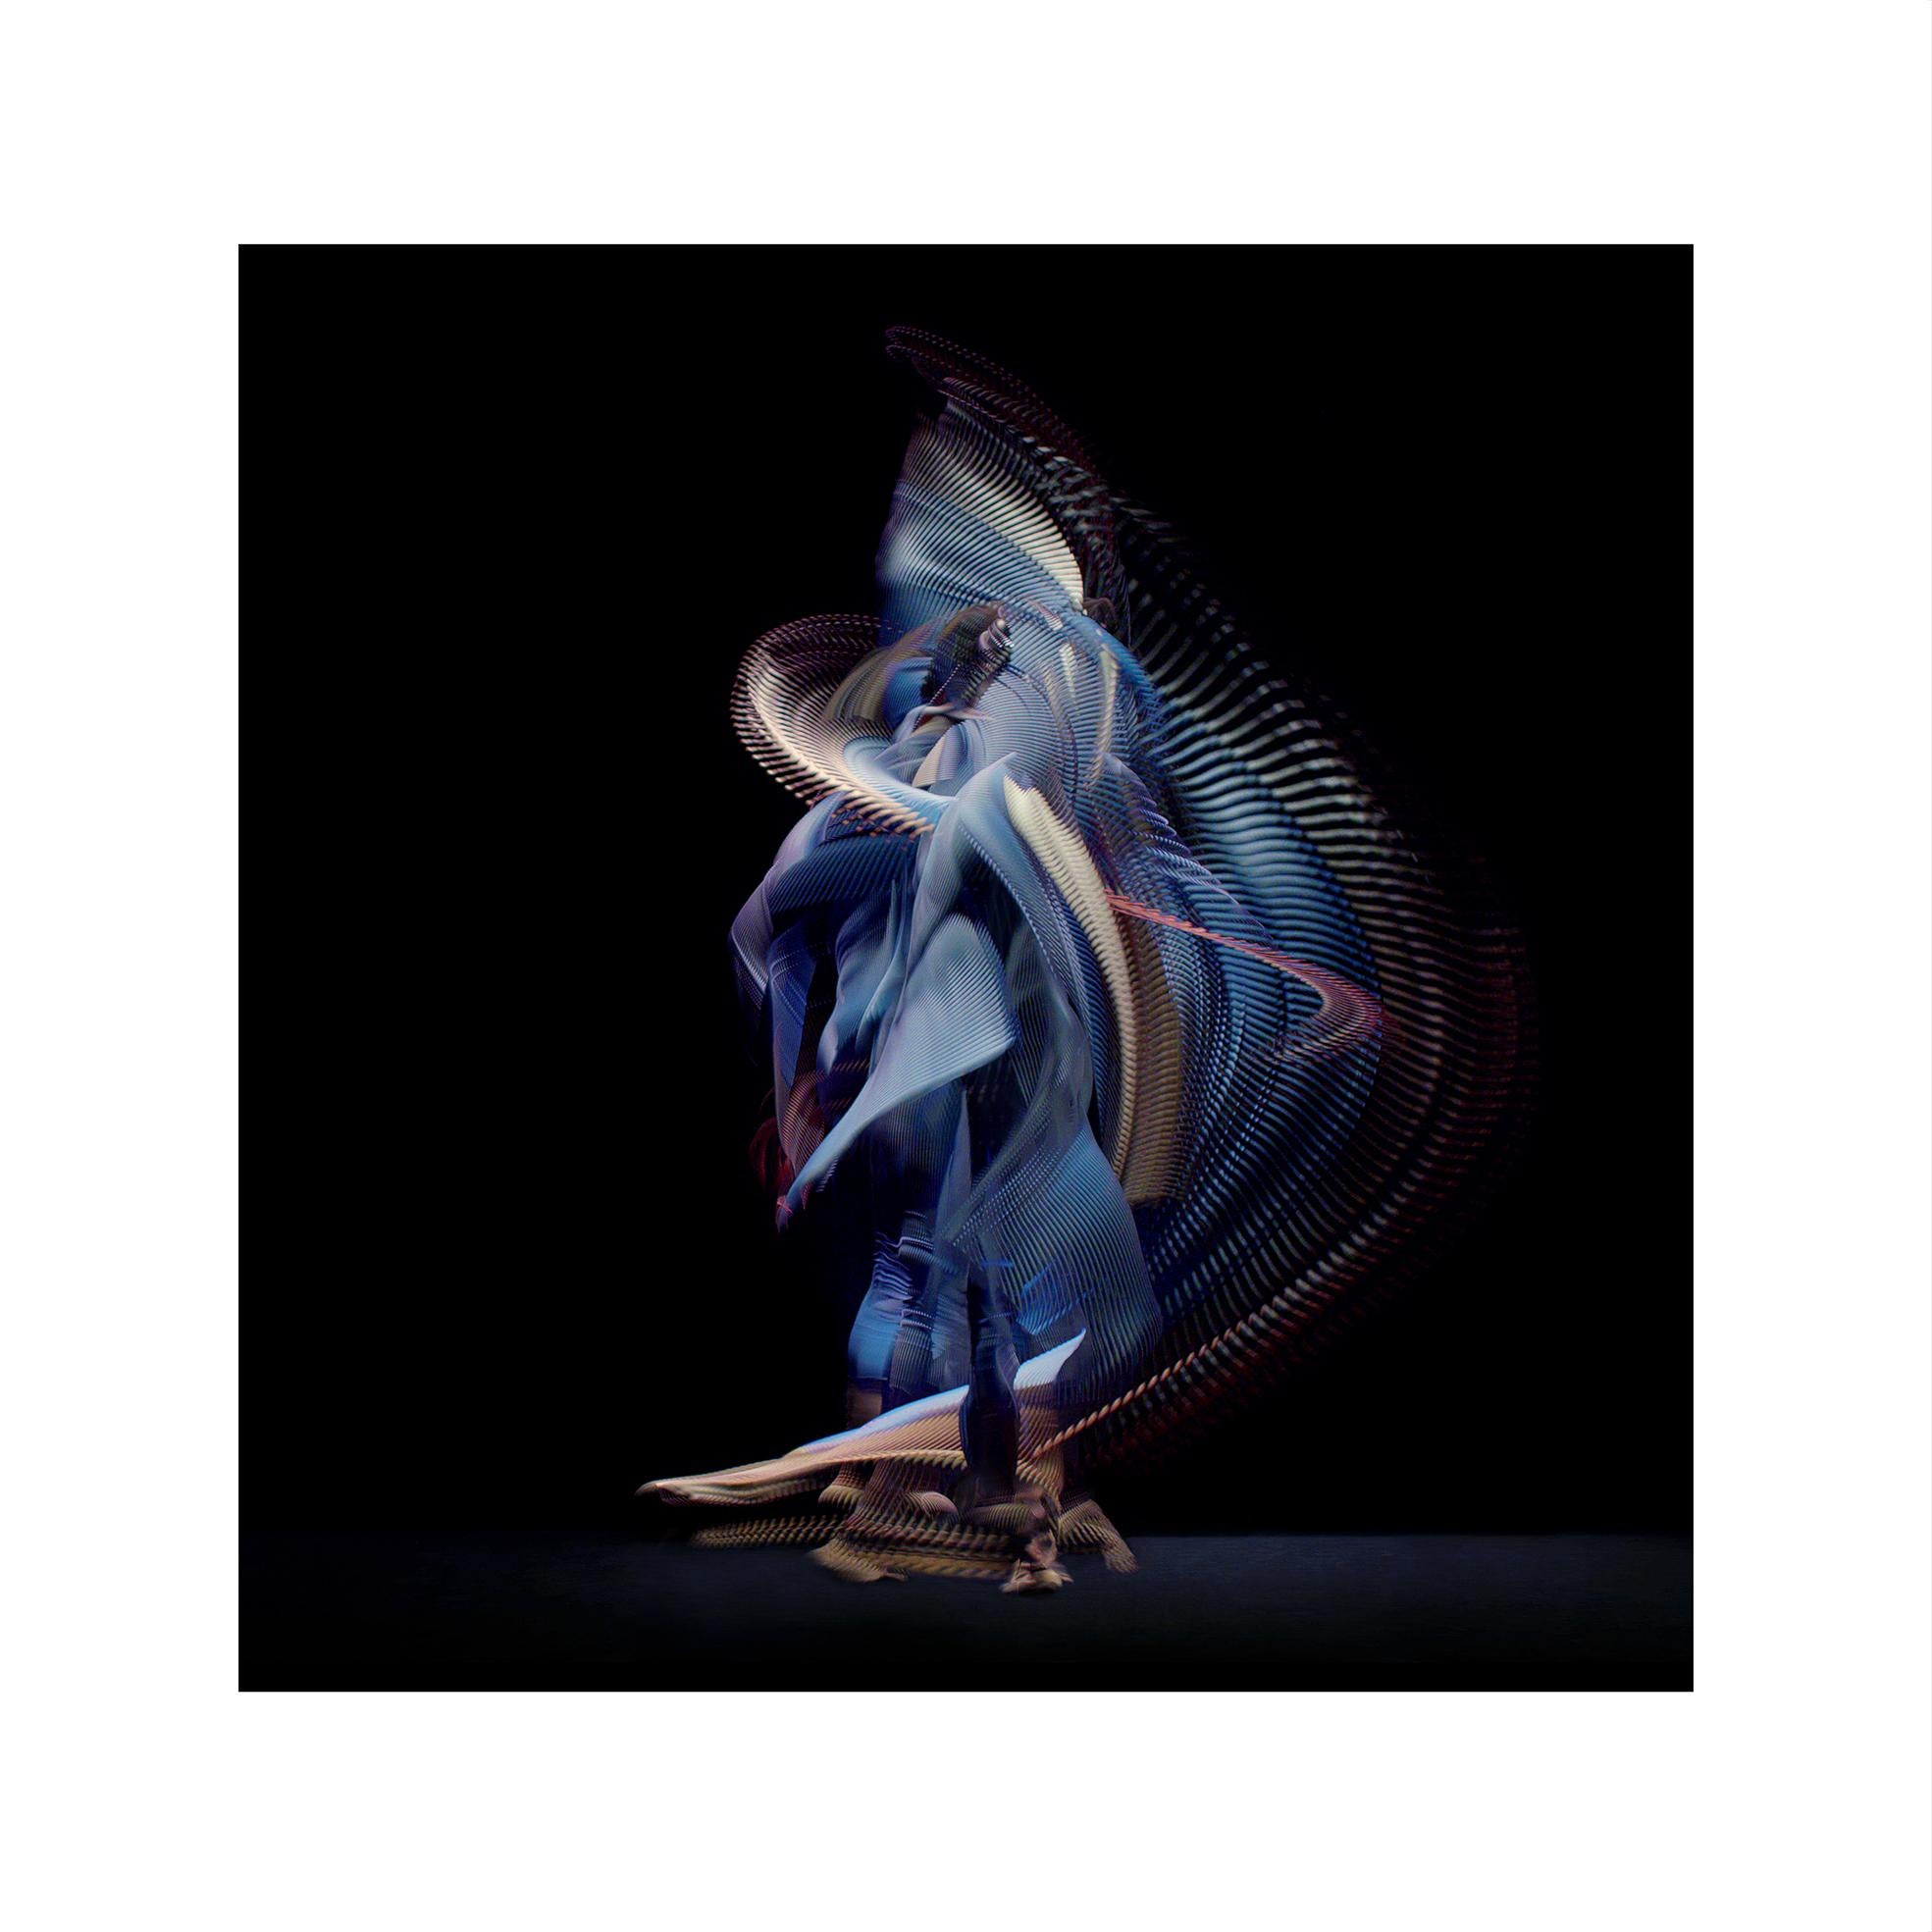 Abstract Dancers, Dark Blue 1, 2019 by Giles Revell - Photography, Black, Ballet